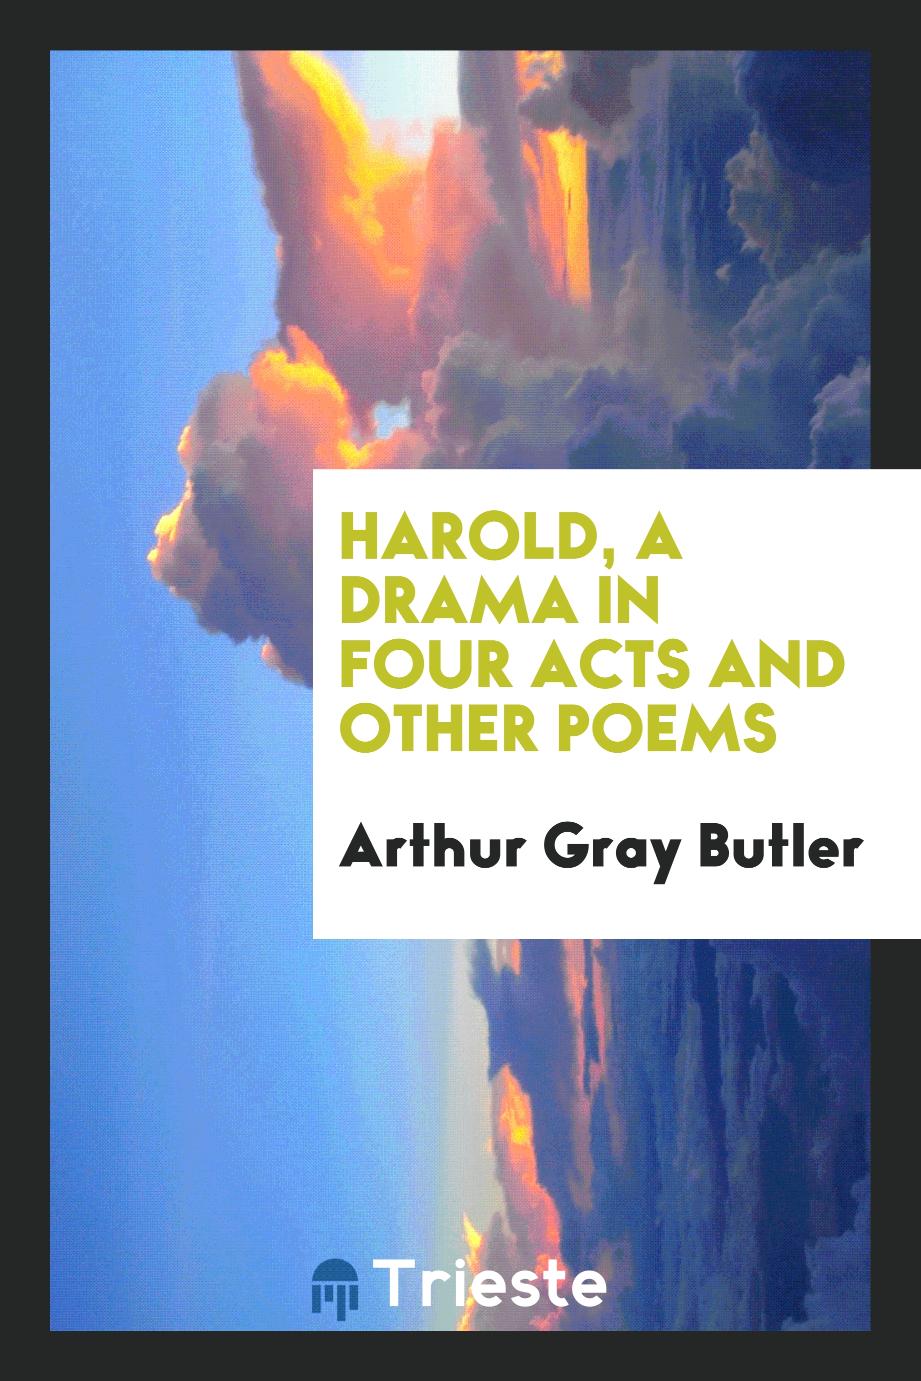 Harold, a drama in four acts and other poems